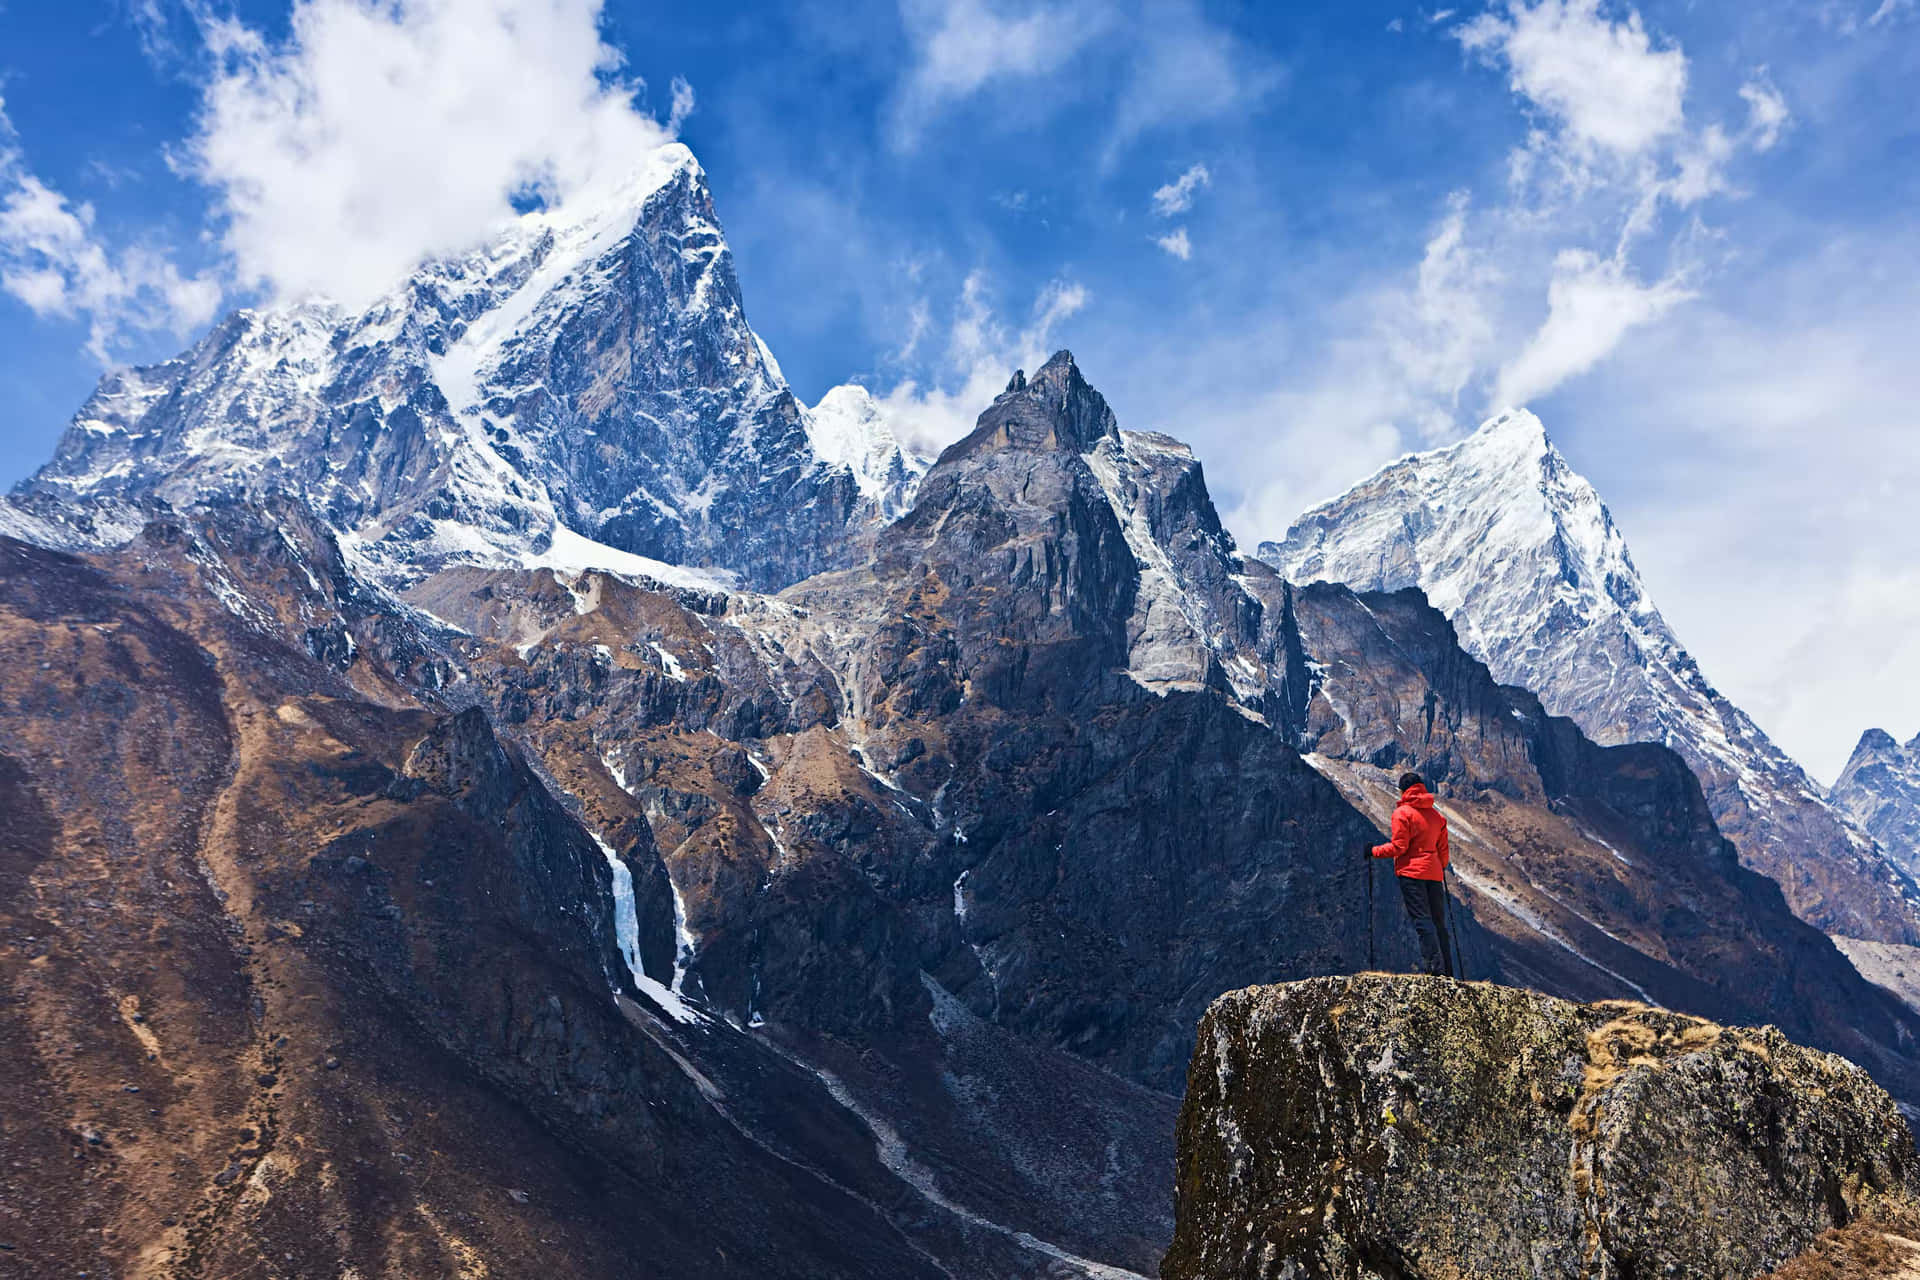 A Man Standing On Top Of A Mountain With Mountains In The Background